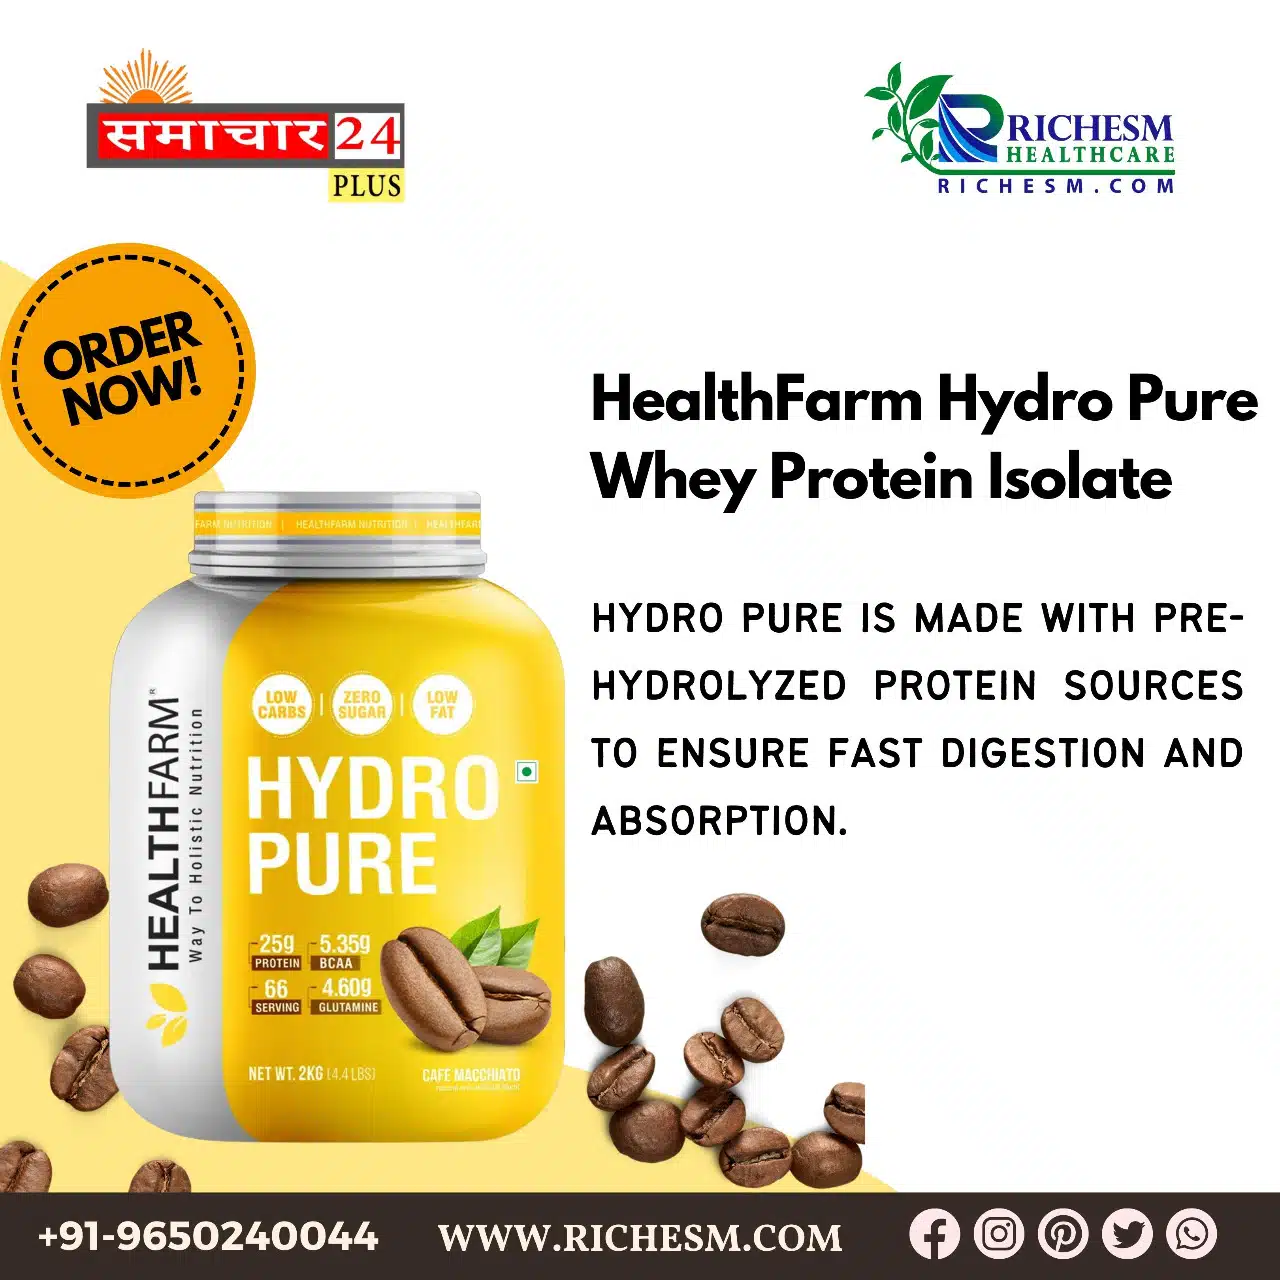 Hydro Pure Whey Protein Isolate